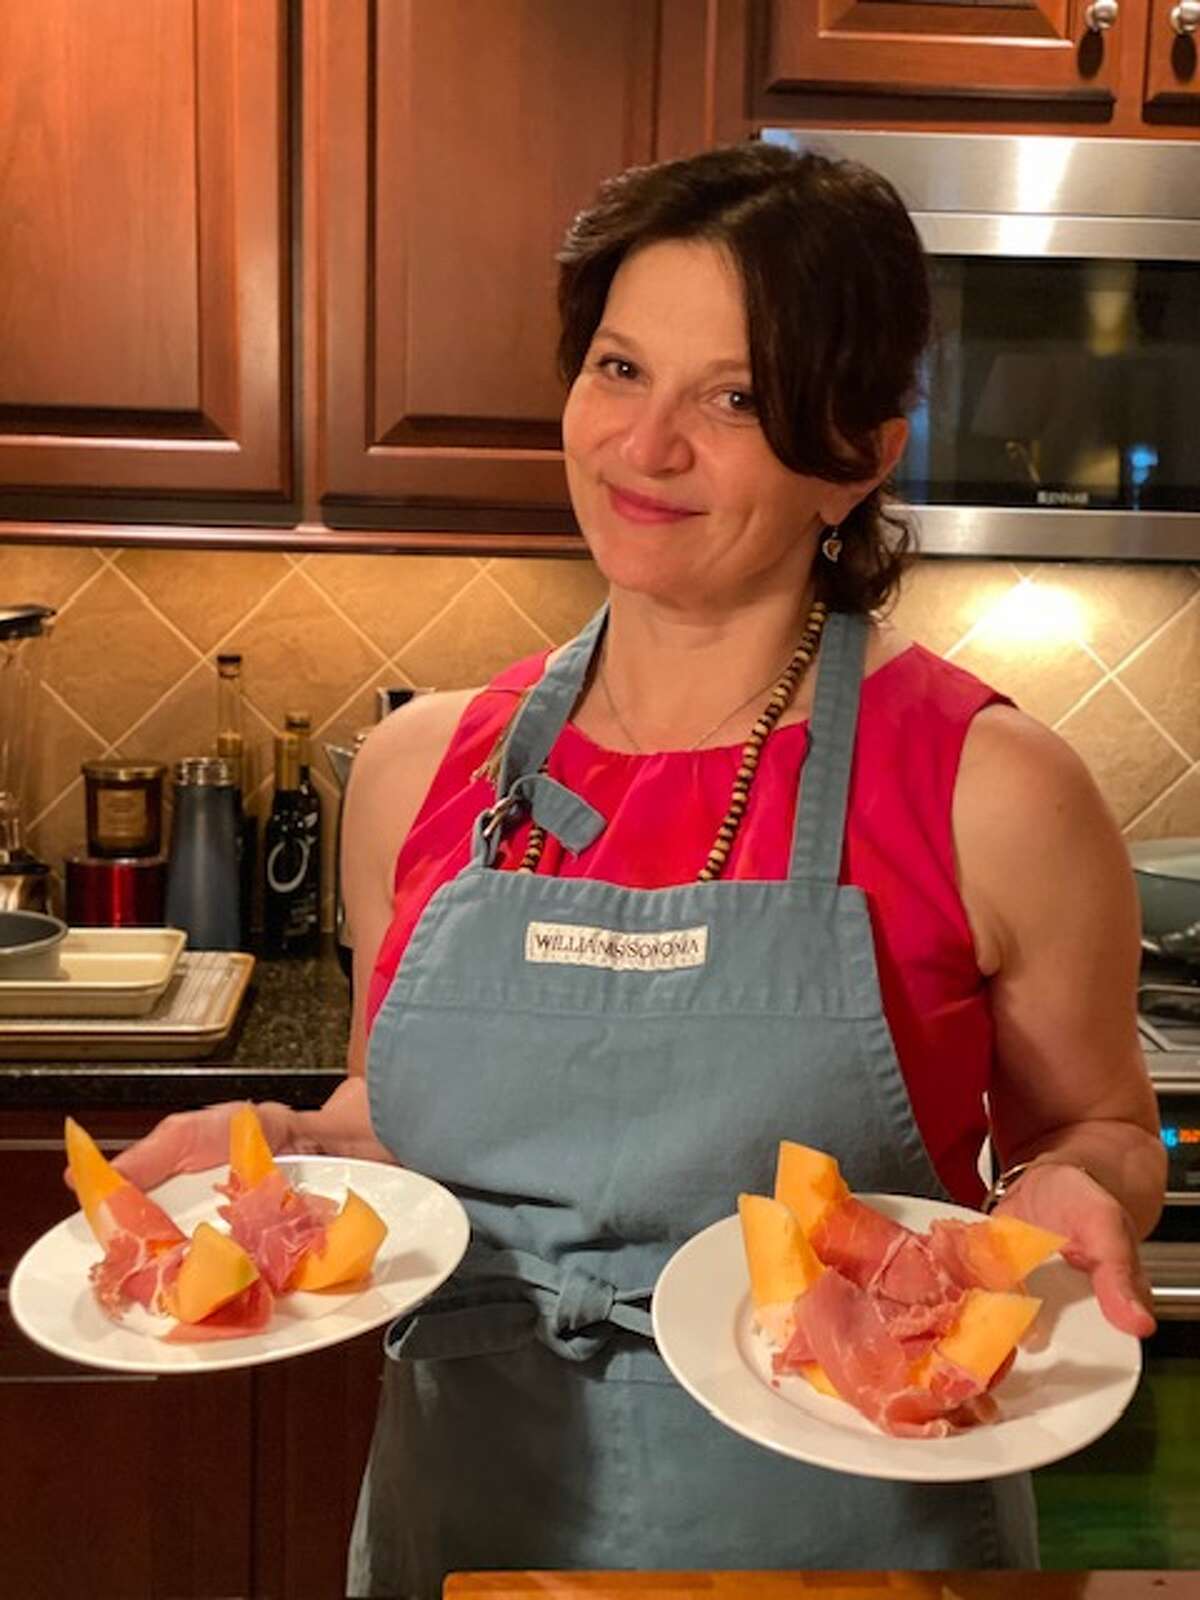 Antoinette LaVecchia in rehearsals for "Secondo" with proscuitto and melon. It is LaVecchia's second turn playing chef and author Giulia Melucci in which she will do one woman show incorporating love and humor while cooking and preparing a meal live on stage. 